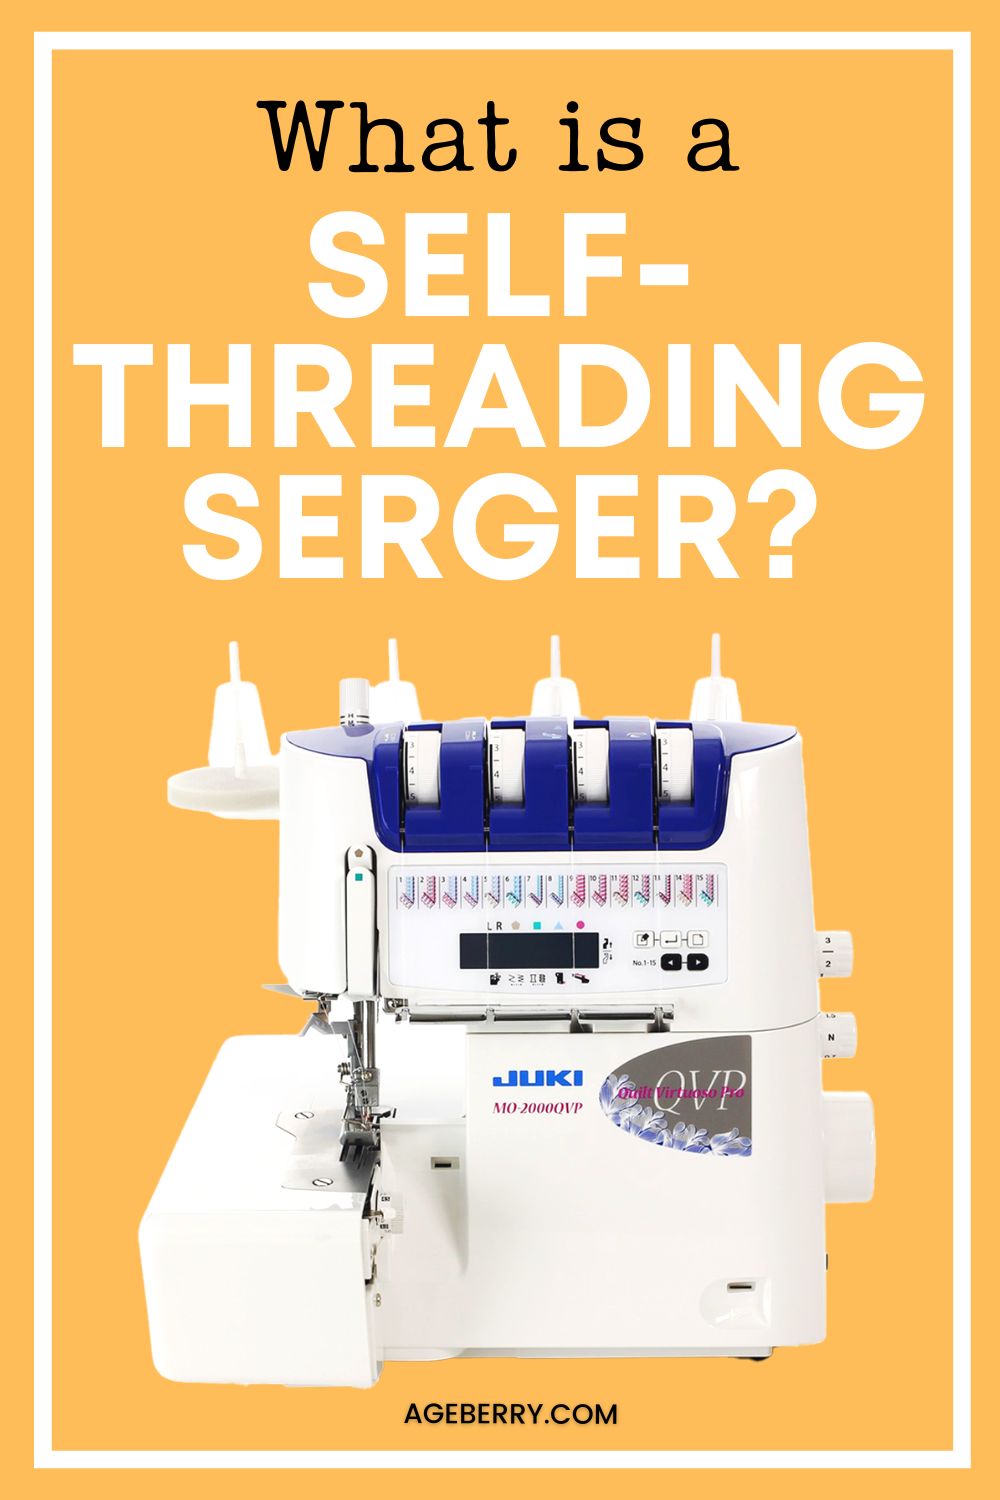 Q&A: Troubleshooting an Automatic Needle Threader - Threads